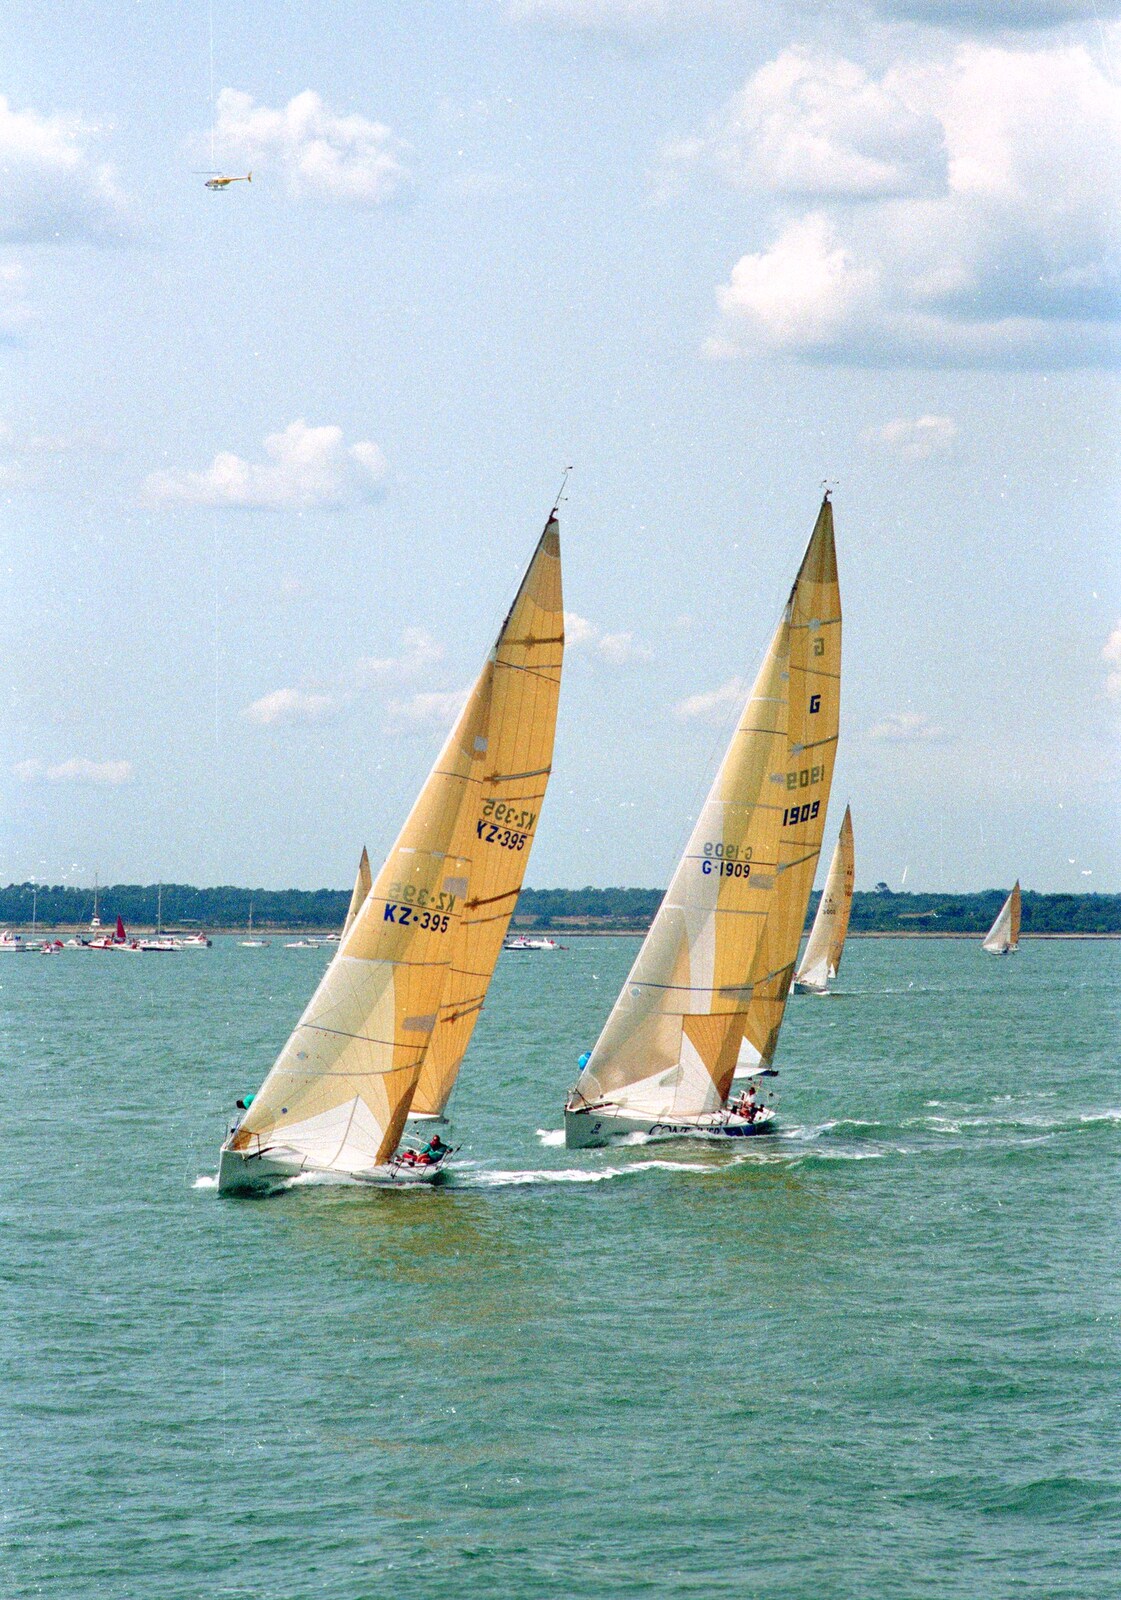 Neck-and-neck sailing from Back from Uni: Yarmouth, Alum Bay and Barton-on-sea, Hampshire - 23rd July 1989